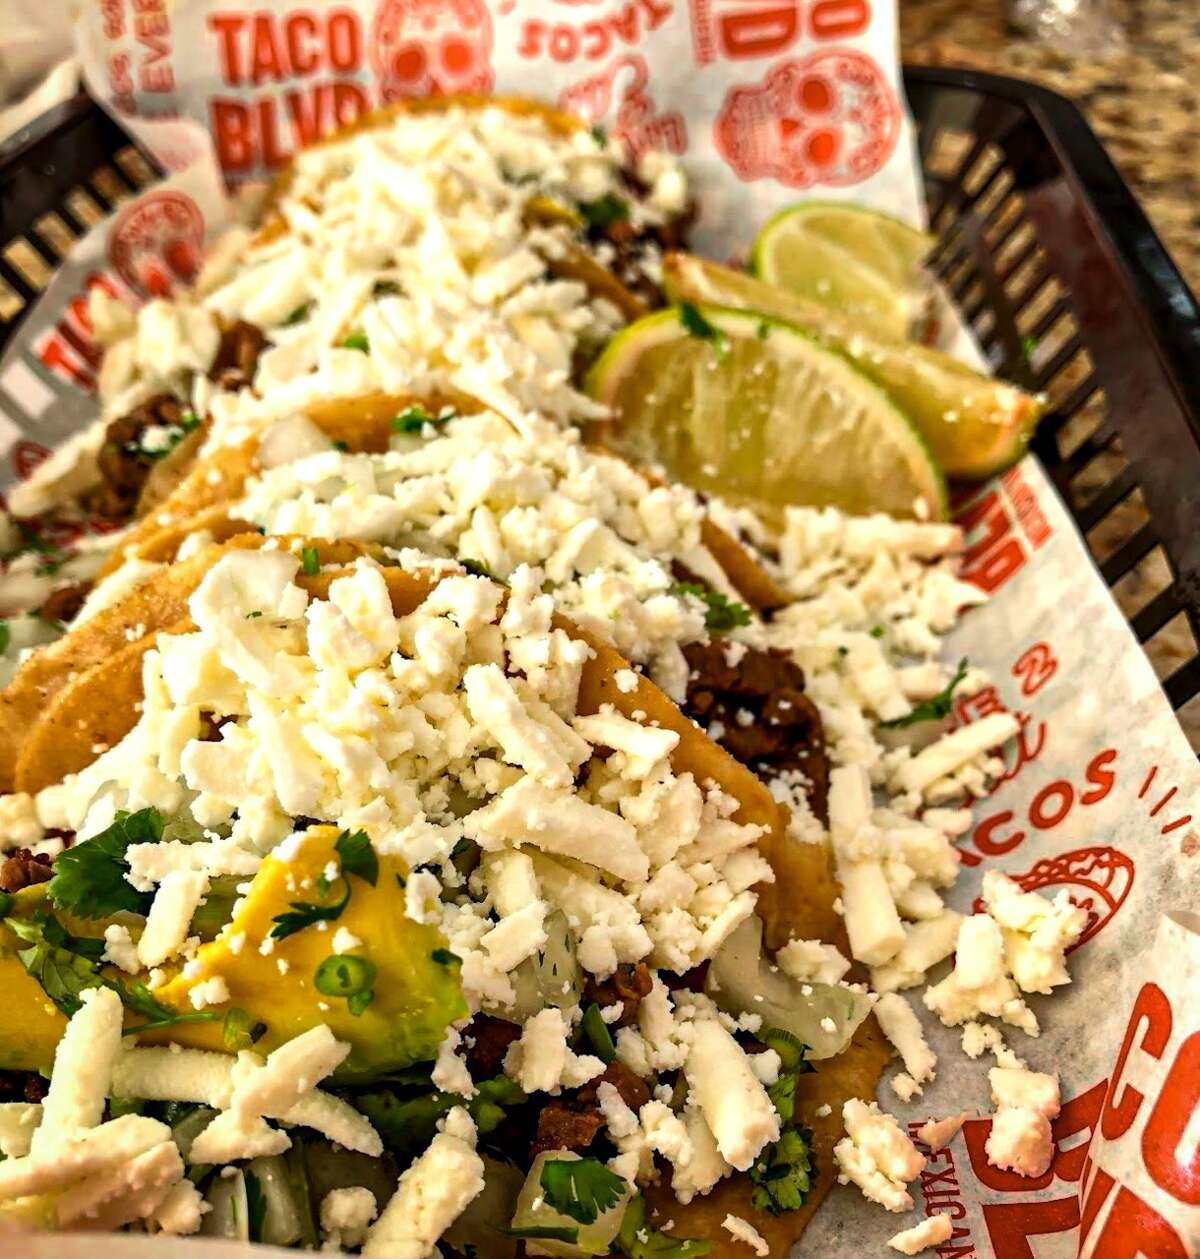 Taco Blvd, fast food taqueria known for "Valley style" offerings, just expanded into the Alamo Ranch area. The business started in Stone Oak in October 2018 at 18360 Blanco Road. Fans can find the new location at 5619 West Loop 1604 North. 